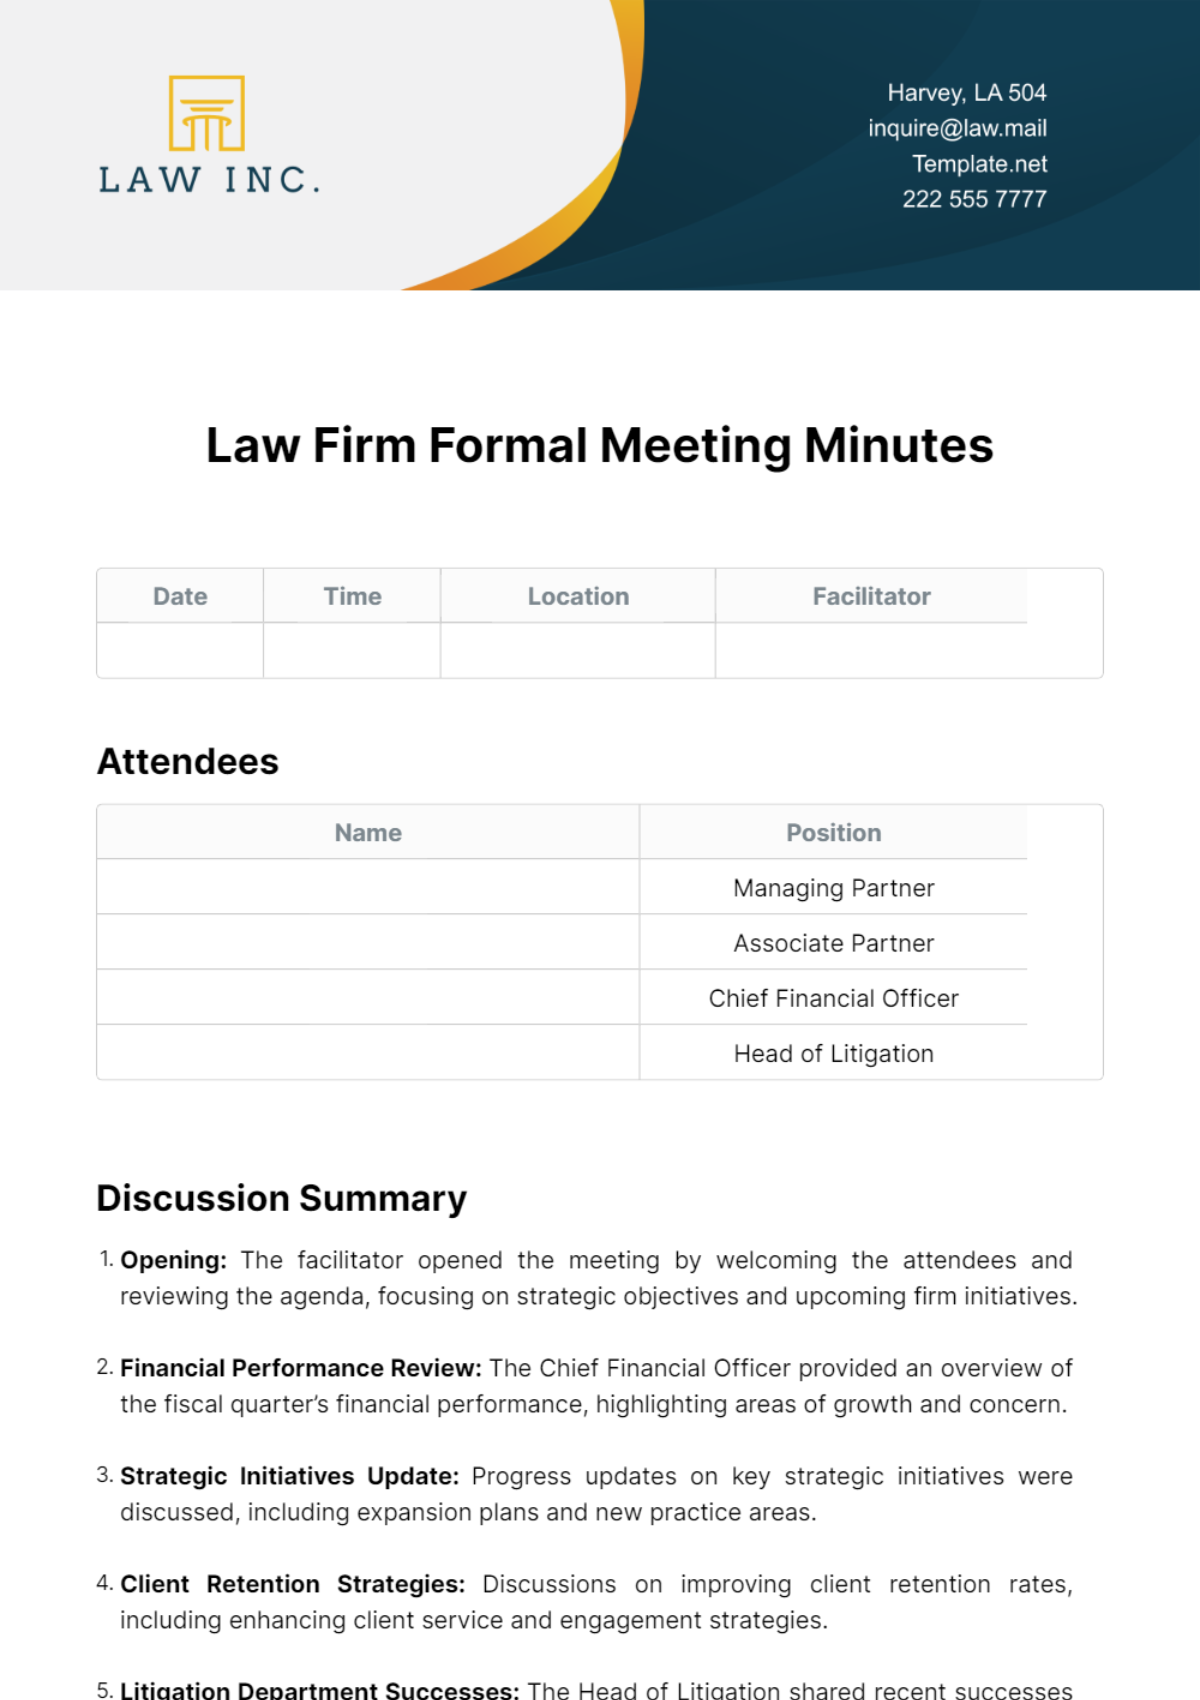 Free Law Firm Formal Meeting Minutes Template